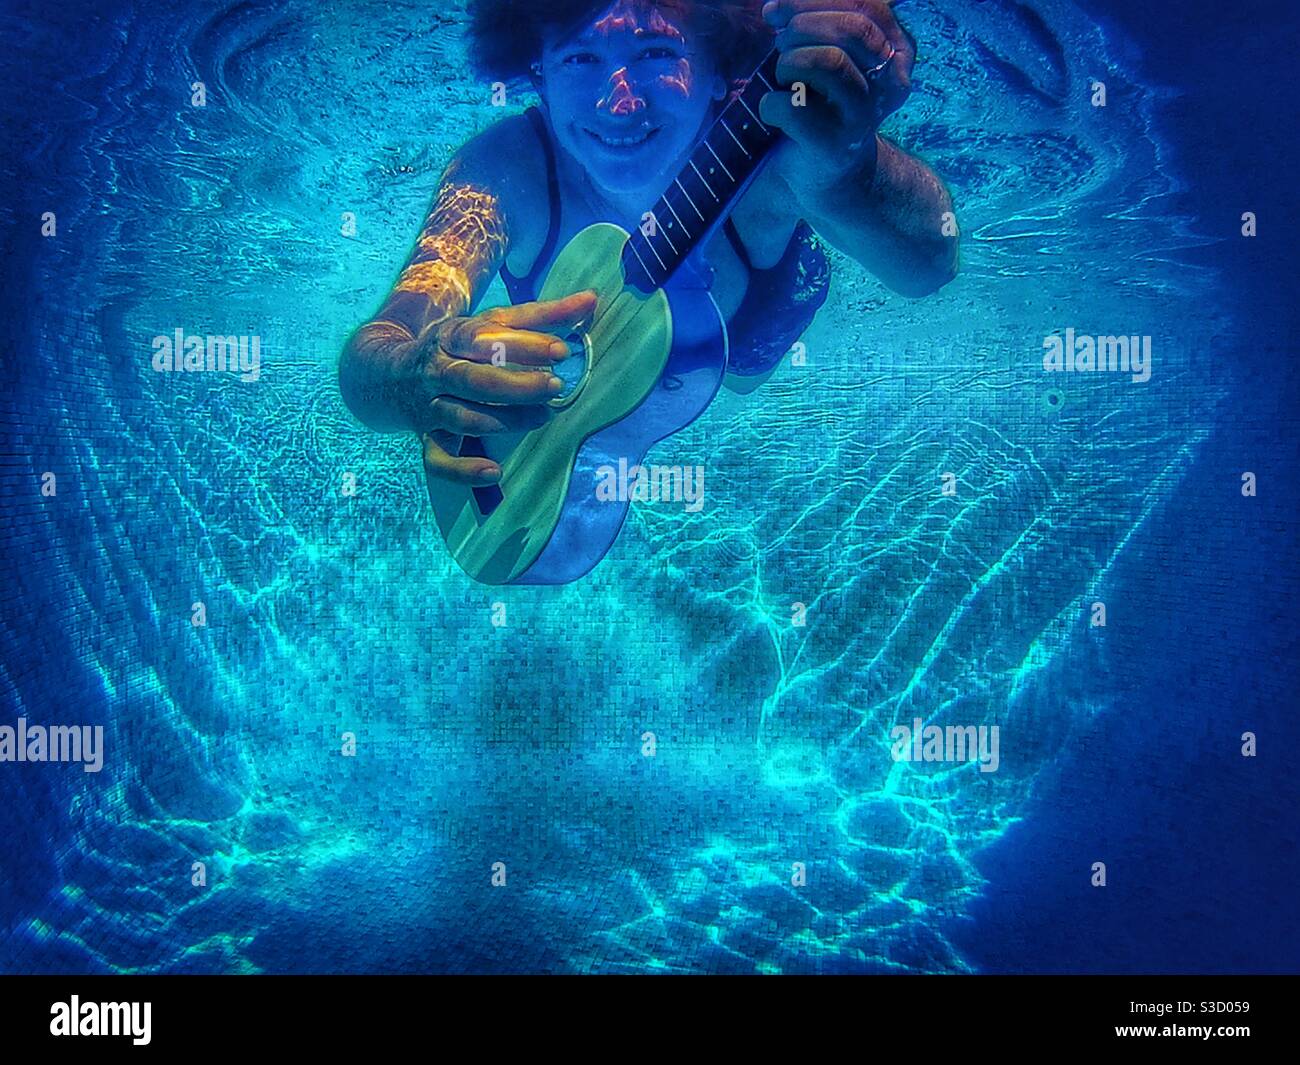 Woman playing a ukulele underwater in a swimming pool Stock Photo